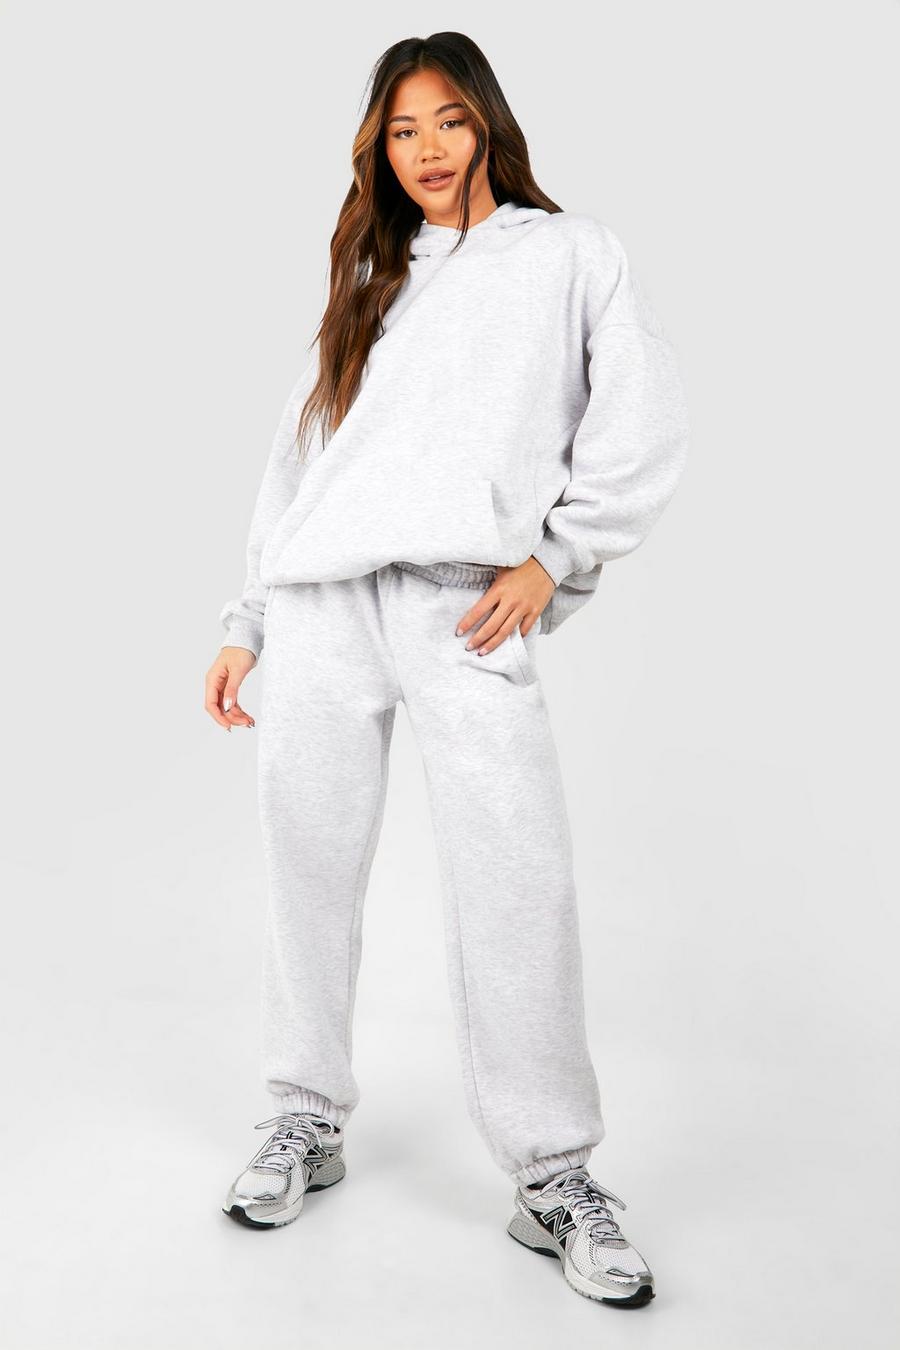 Ash grey Dsgn Studio Hooded Cuffed Track Pants Tracksuit